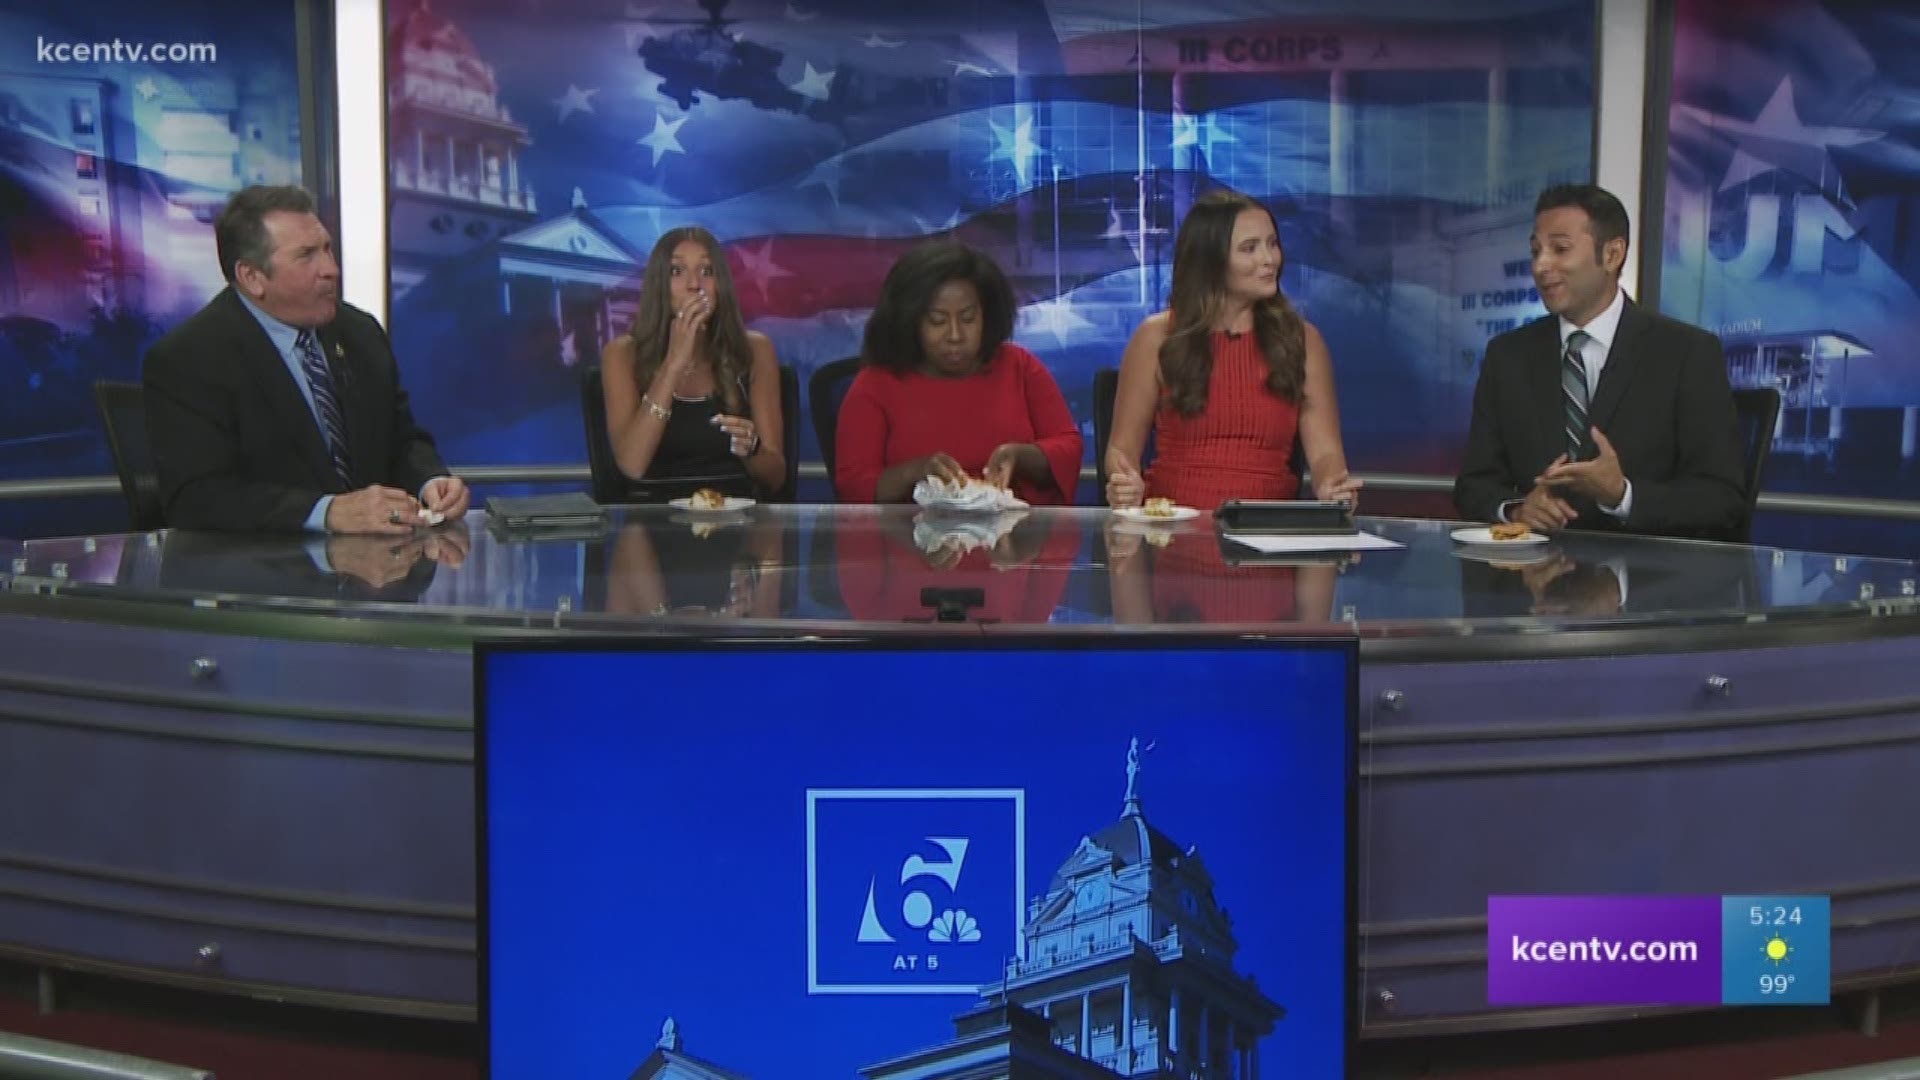 The 6 News evening team gave their opinions on the Great Chicken Fight of 2019.